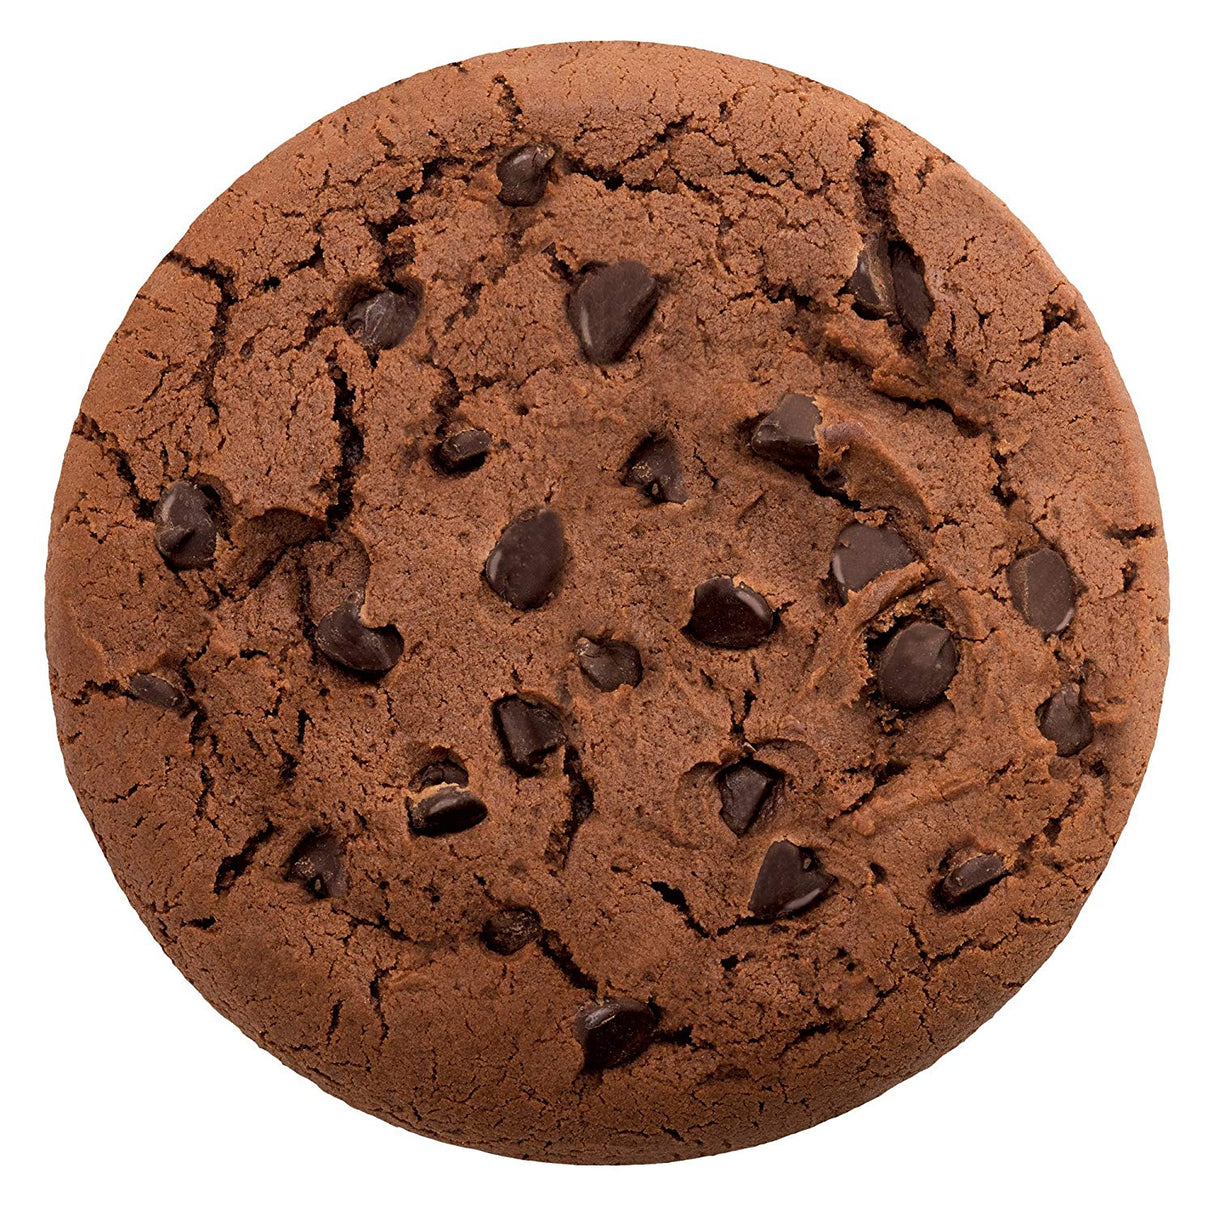 The Complete Cookie 12 x 113g Double Chocolate